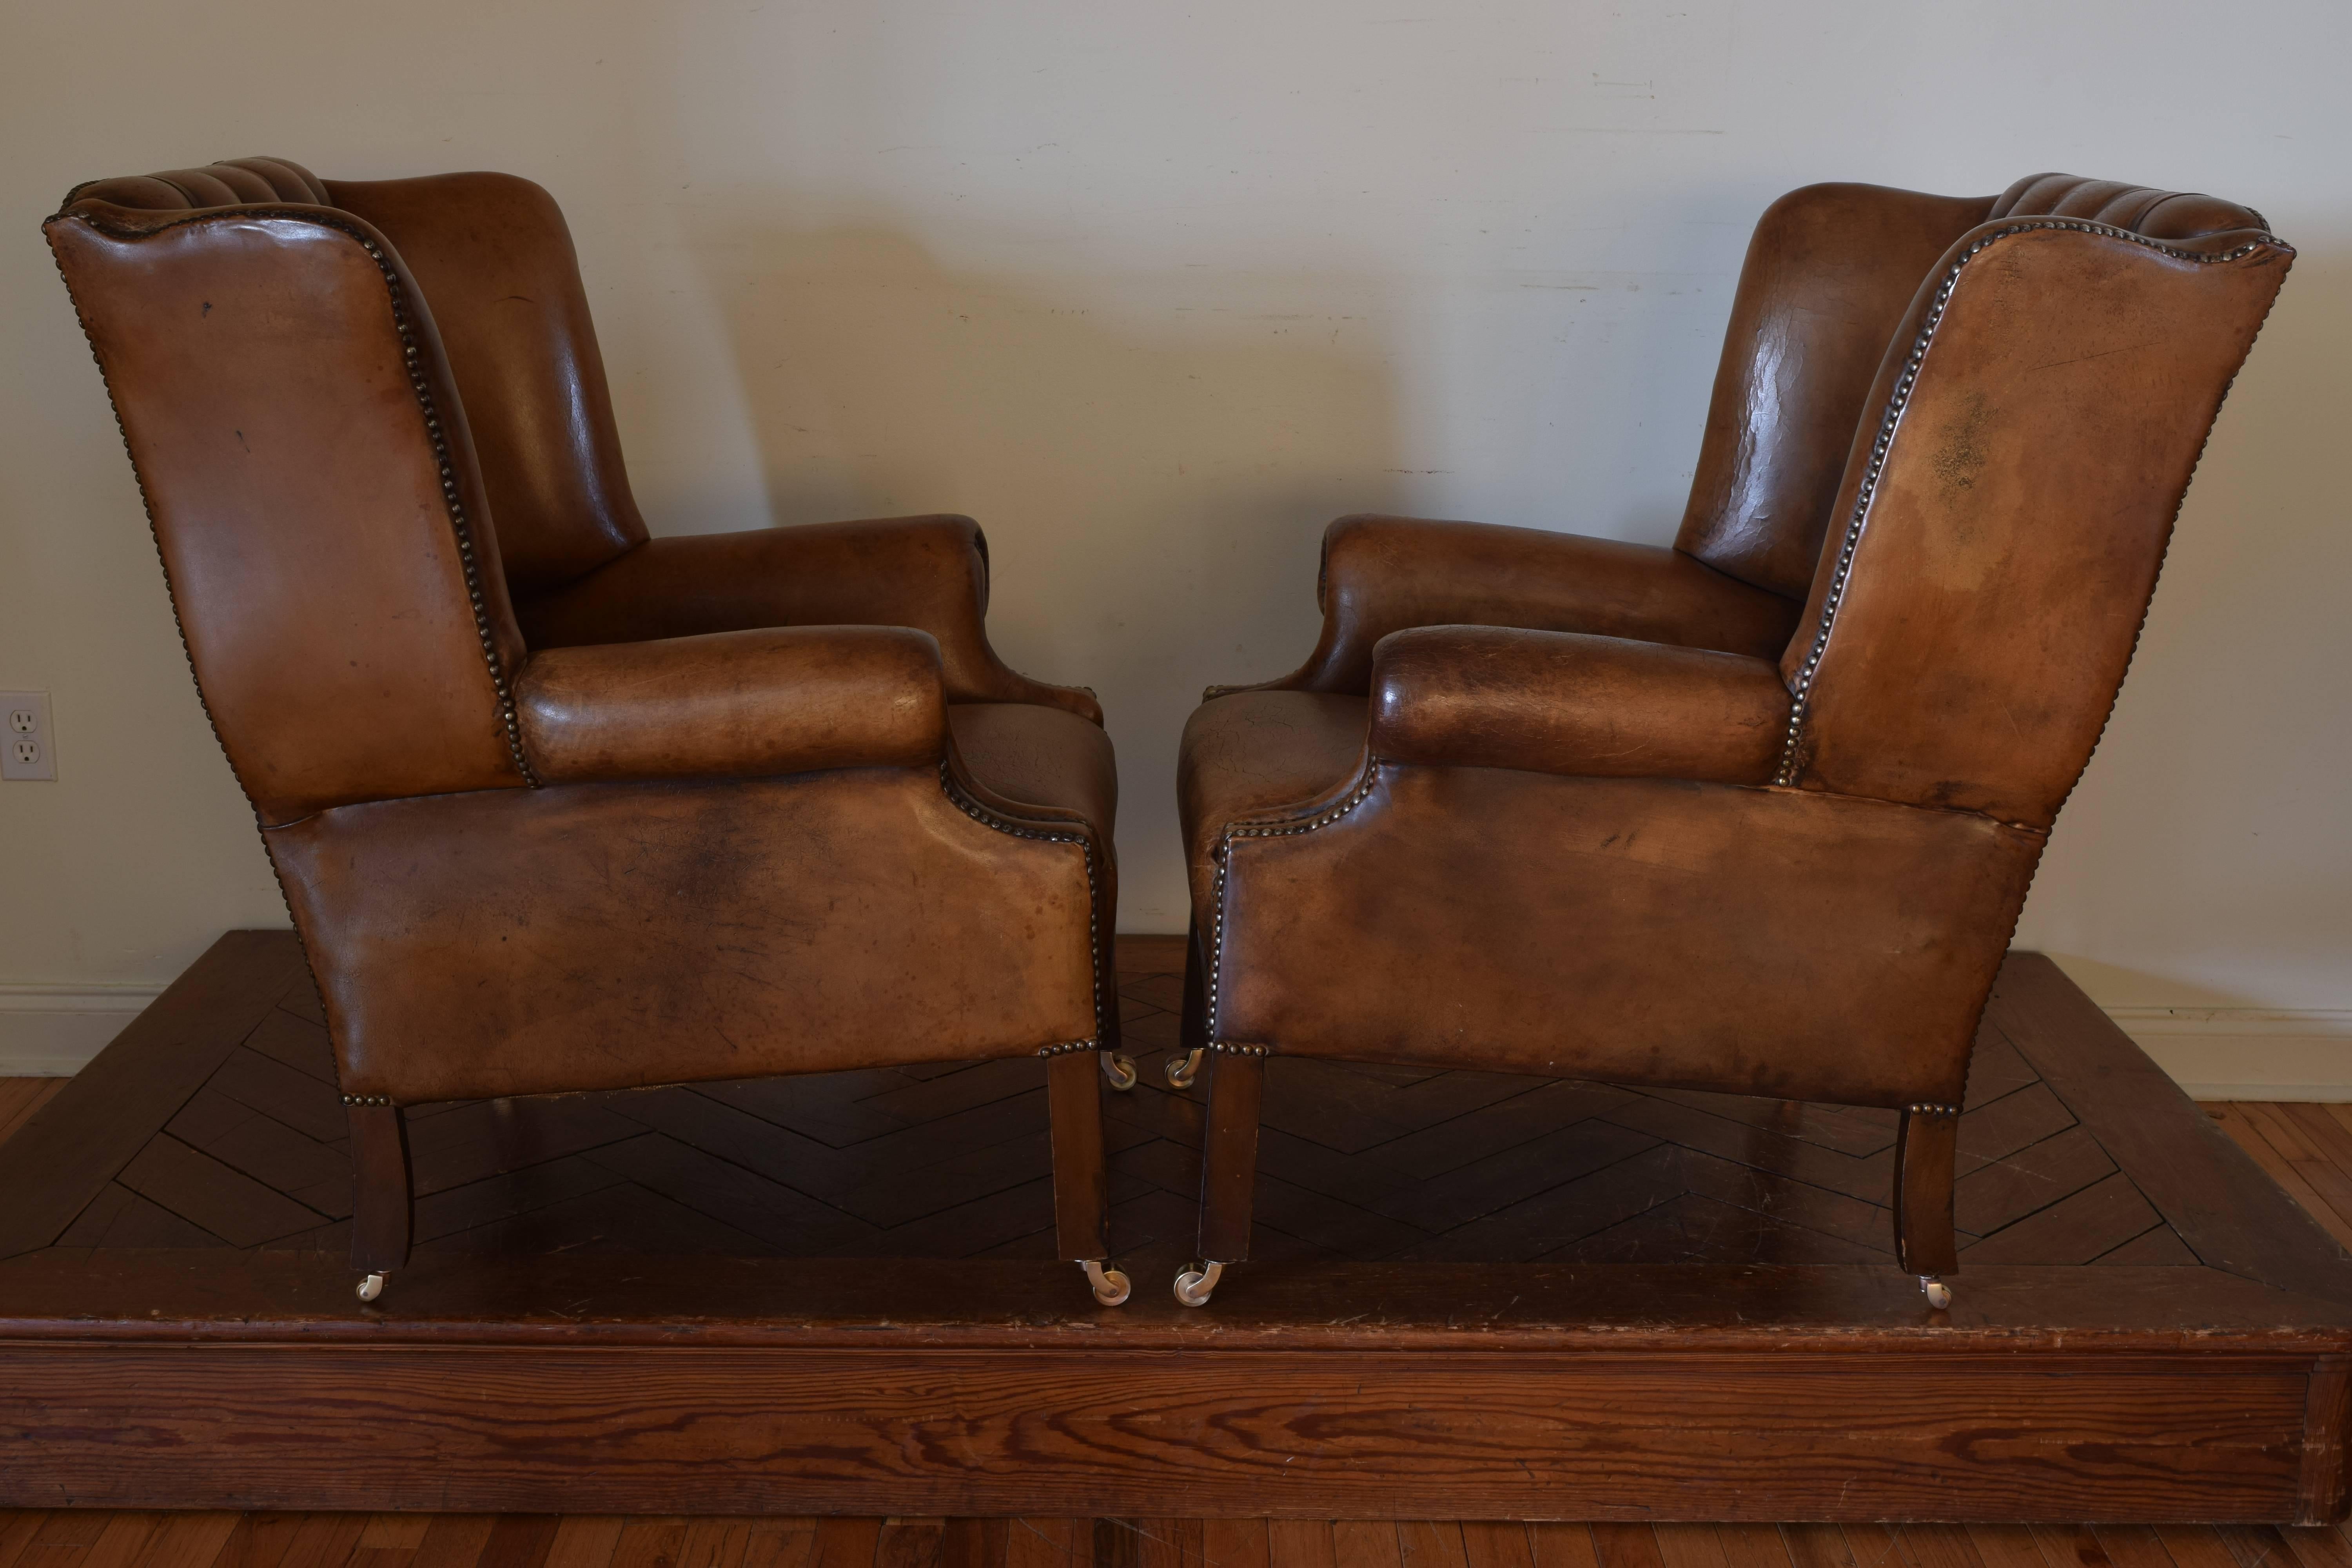 Mid-20th Century Pair of English George III Style Tufted Leather Wing Chairs